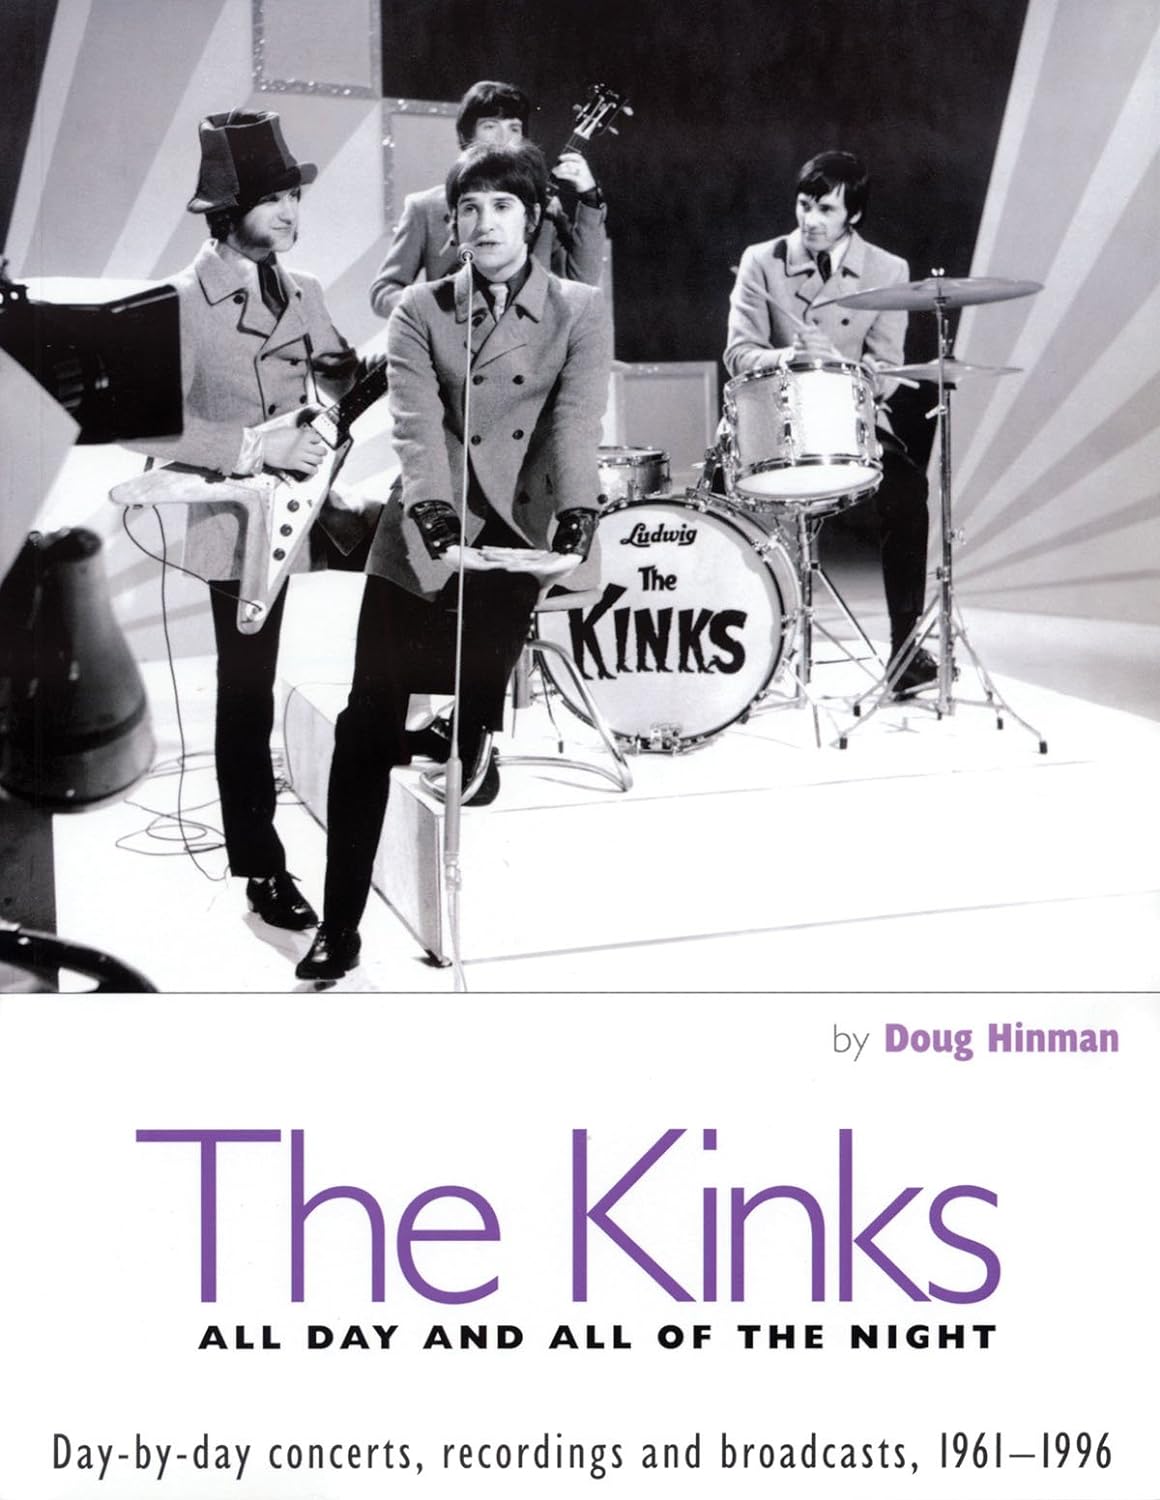 DOUG HINMAN / KINKS: ALL DAY AND ALL OF THE NIGHT DAY BY DAY CONCERTS, RECORDINGS, AND BROADCASTS, 1961-1996